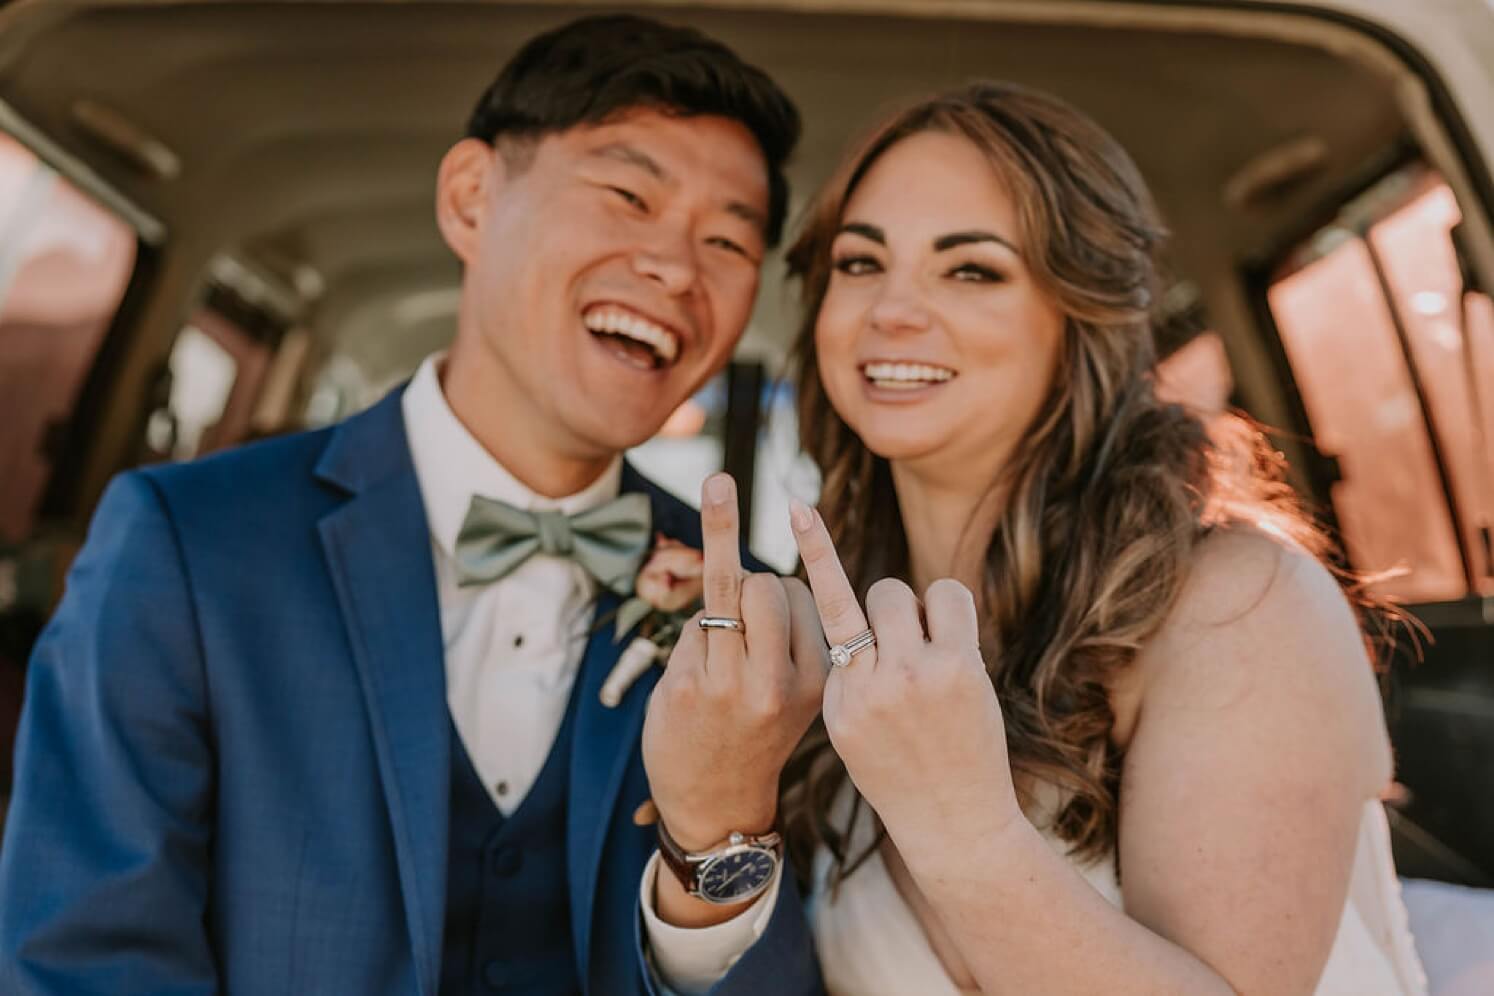 Bride and groom showing off wedding rings after Colorado elopement | McArthur Weddings and Events